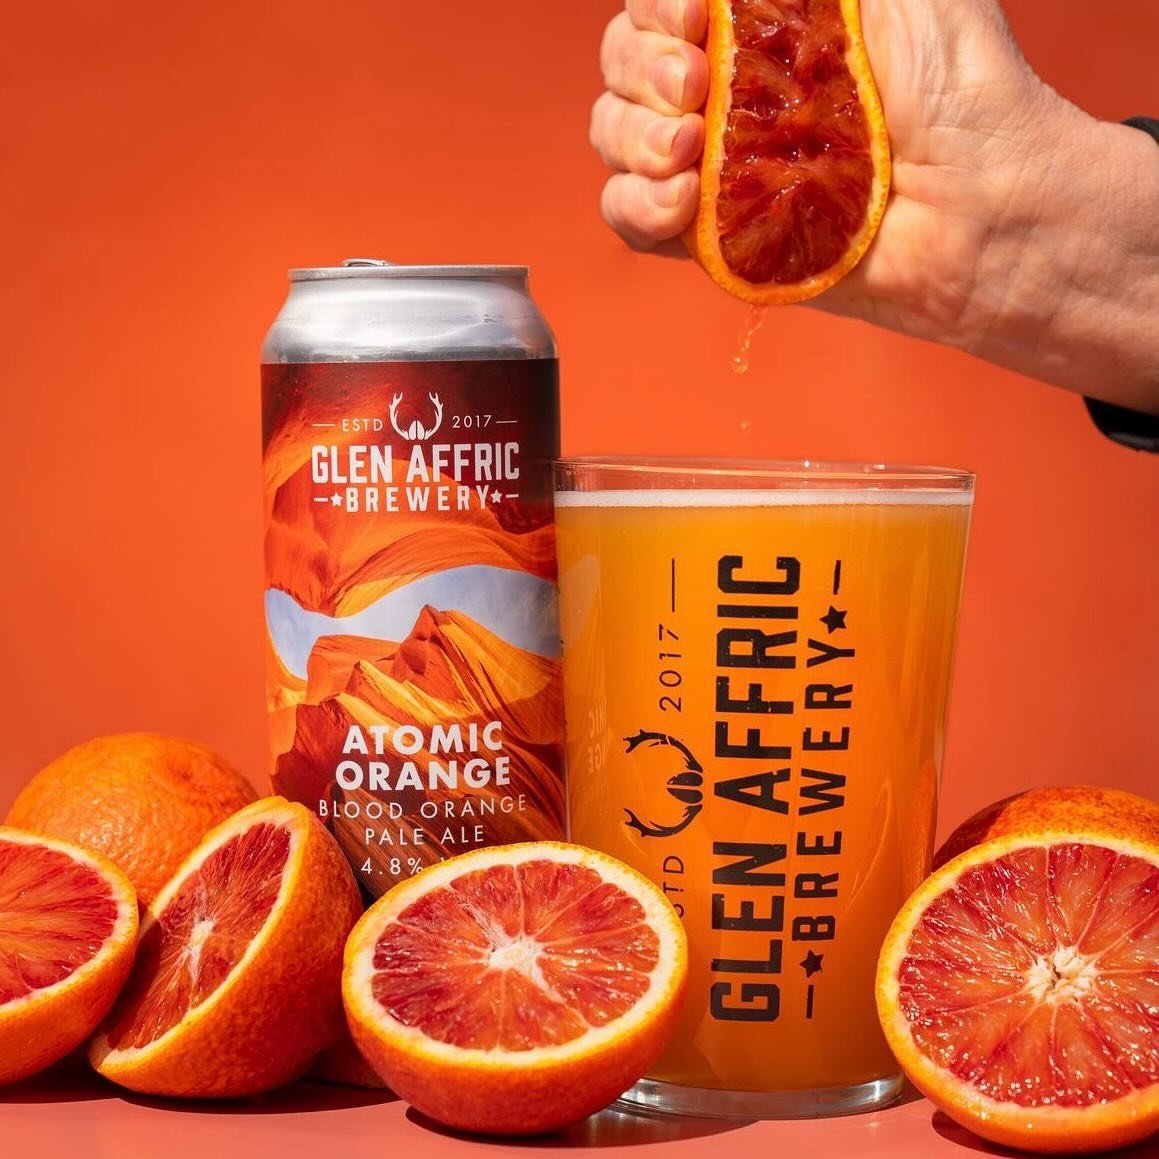 💣🍊 ATOMIC ORANGE IS HERE 🍊💣

Making the triumphant return that so many of you have been waiting for!

Get amped to the max with an atomic level blood orange juice. Delivering that intense, juicy &amp; sweet flavour you know and love. Backed up wi